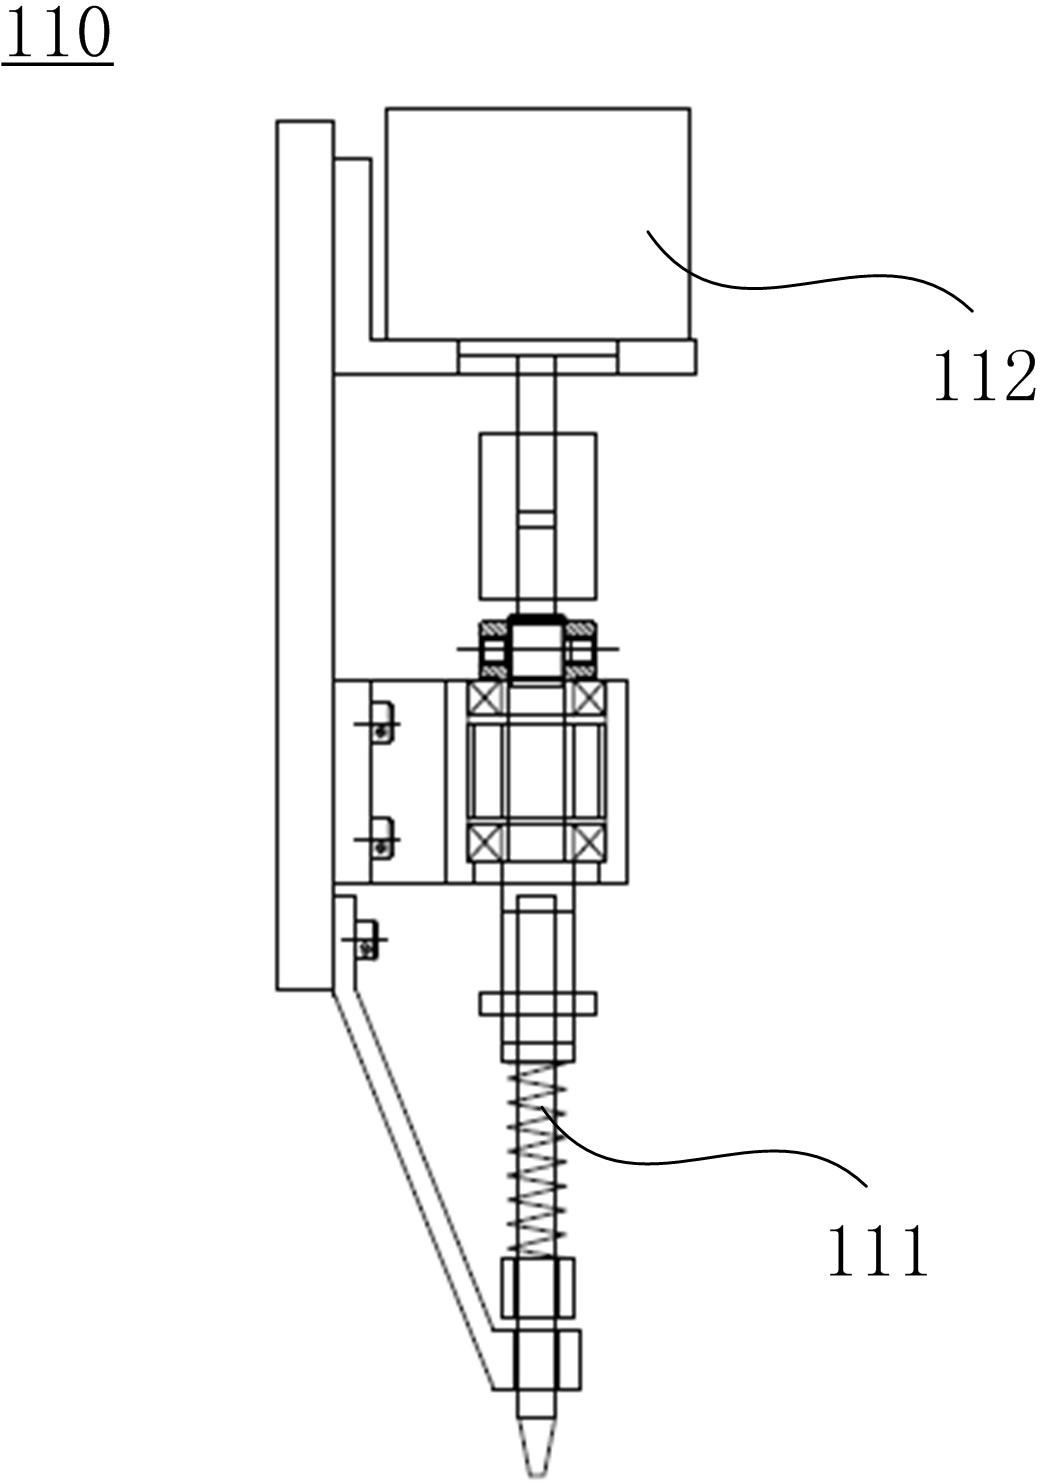 Device and method for regulating electrical parameters